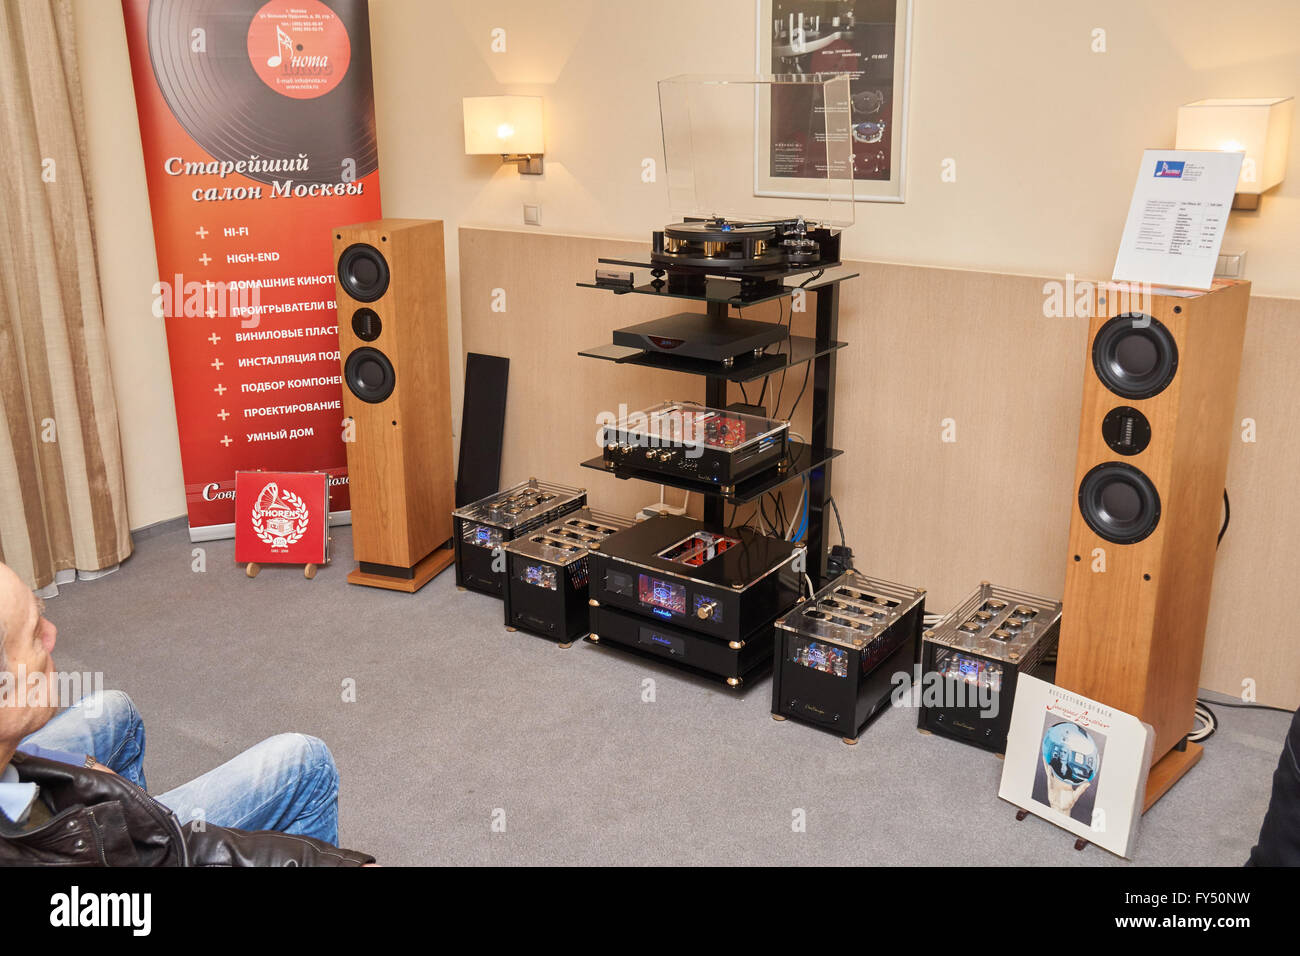 Moscow Hi Fi and High End Show, Moscow, Russia - April 15, 2016: Audio system components in the show room Stock Photo